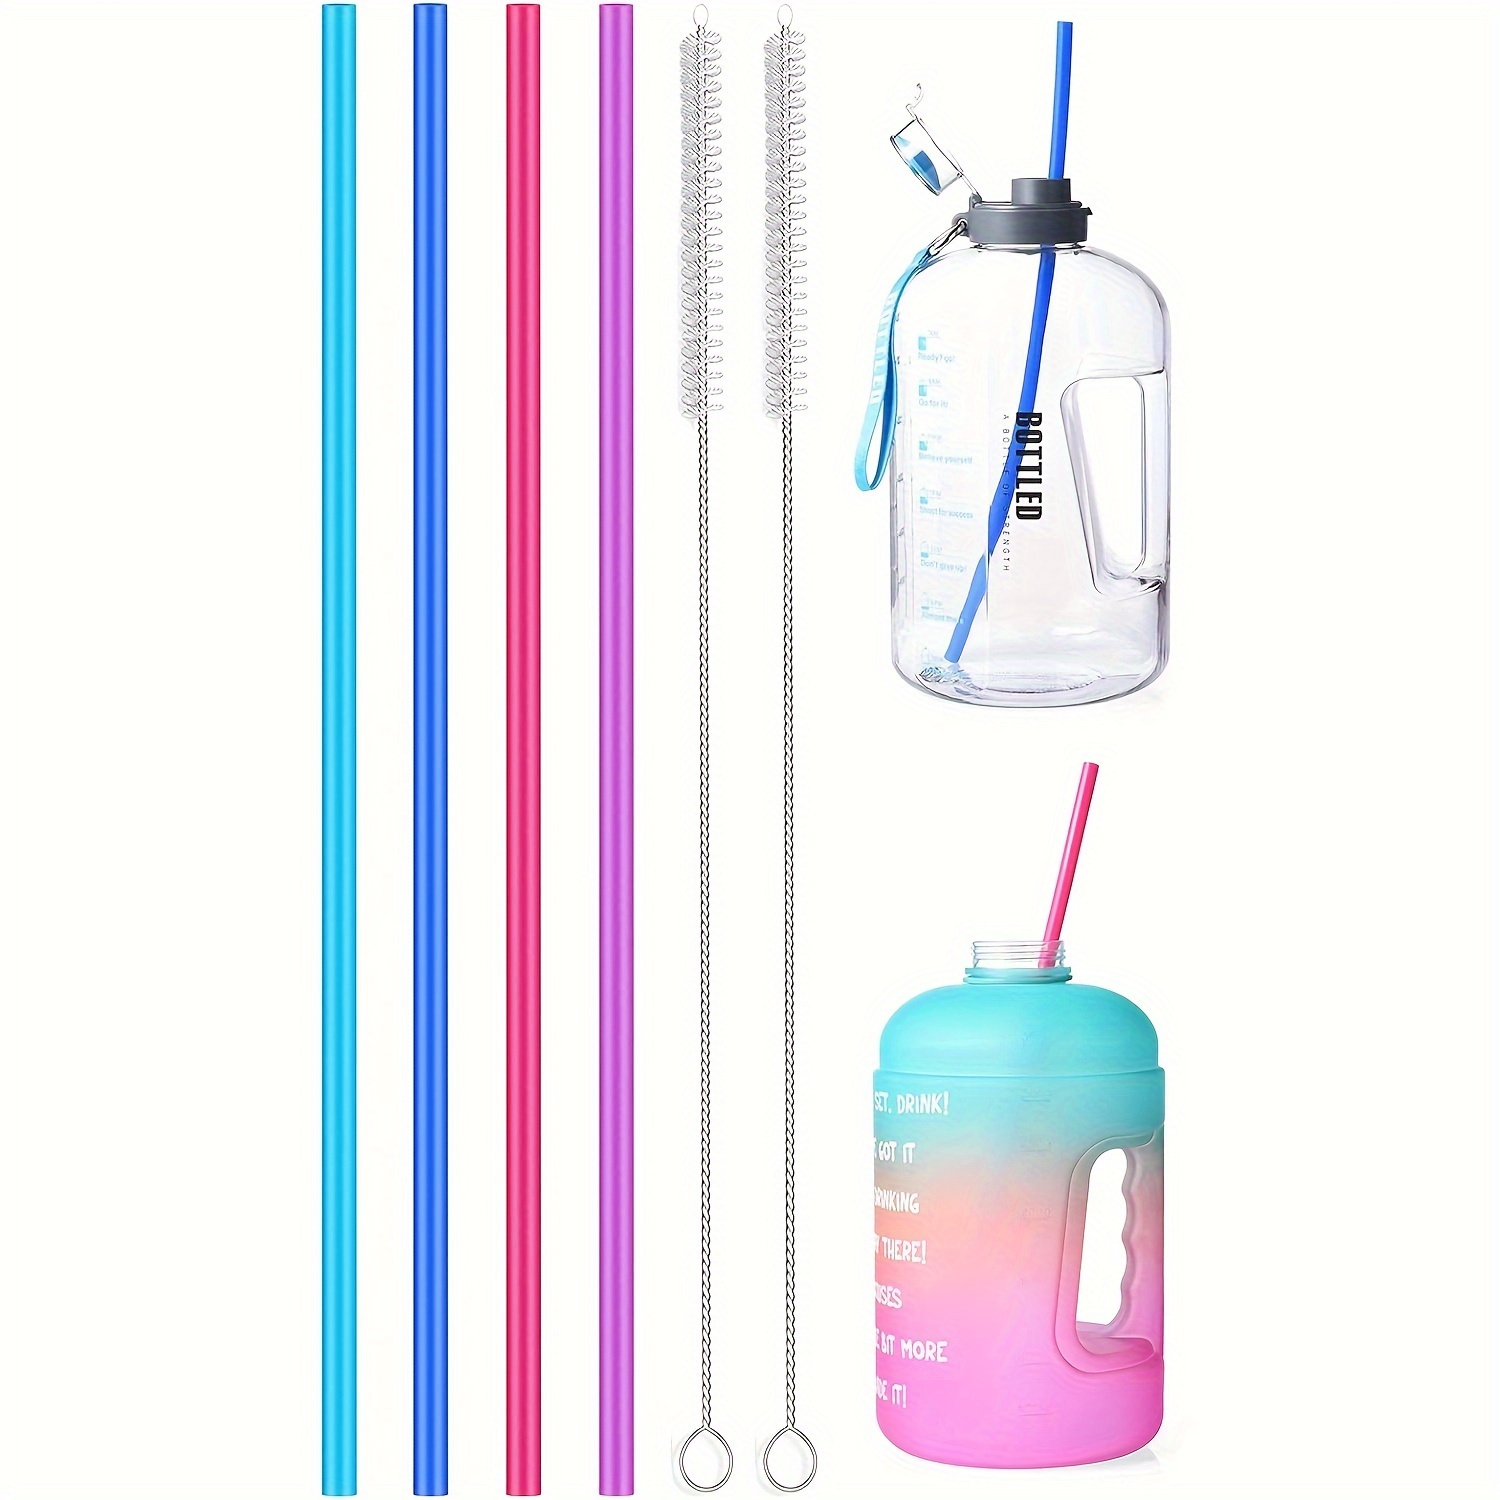 

4pcs, Stra, Extra Long Straw, Reusable Silicone Straws, Flexible Straws For Stanley 40oz Tumblers, For 1 Gallon Water Bottles, Straw With Cleaning Brush, Home Supplies, 15in